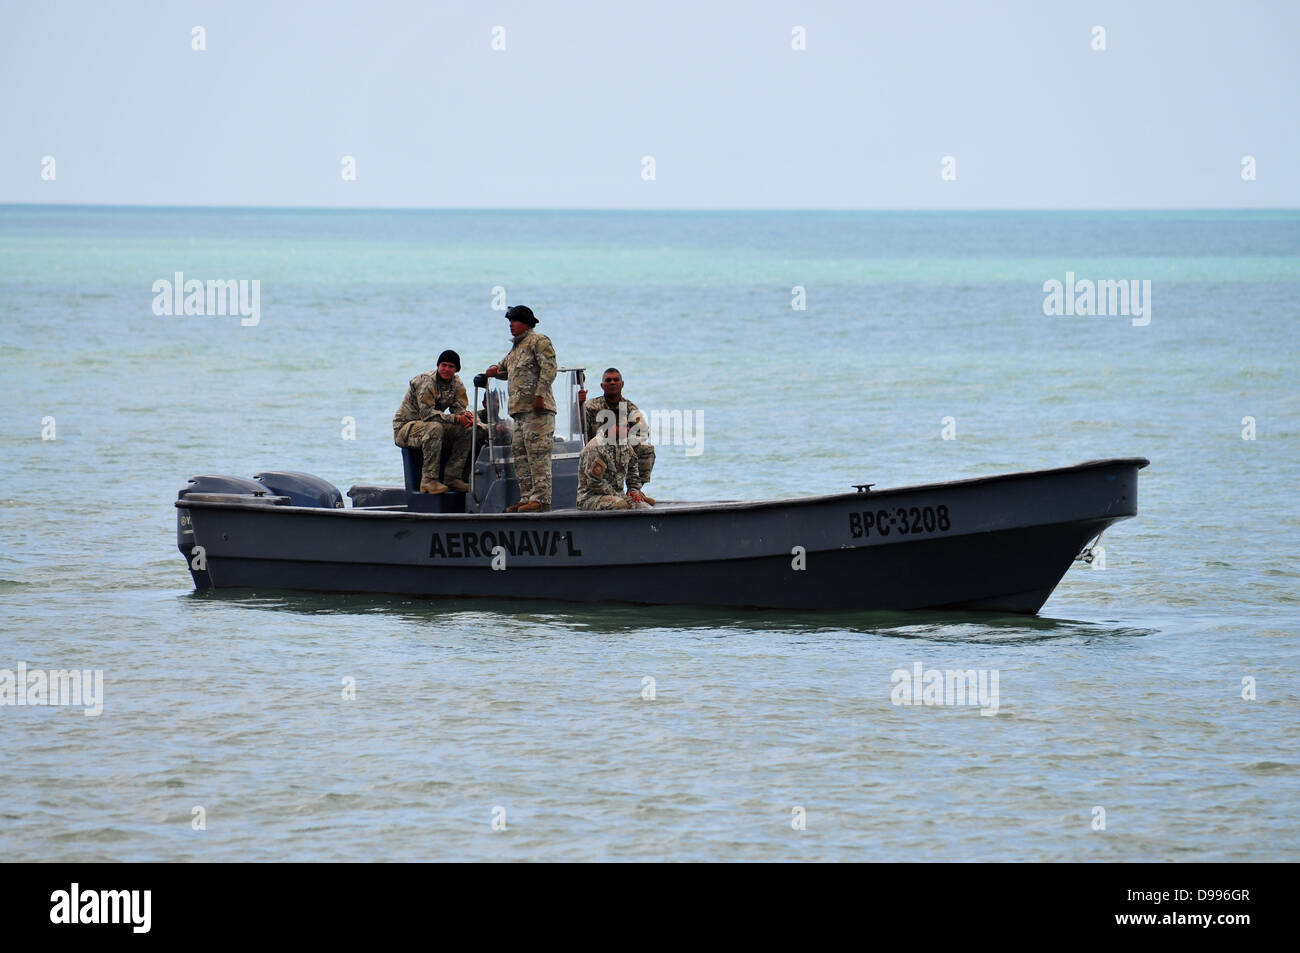 FARALLON, PANAMA - MAY 28: Units of the Servicio Aeronaval Patrolling the waters looking for illegal drugs   May 28, 2013 in Farallon Cocle, Panama. Stock Photo